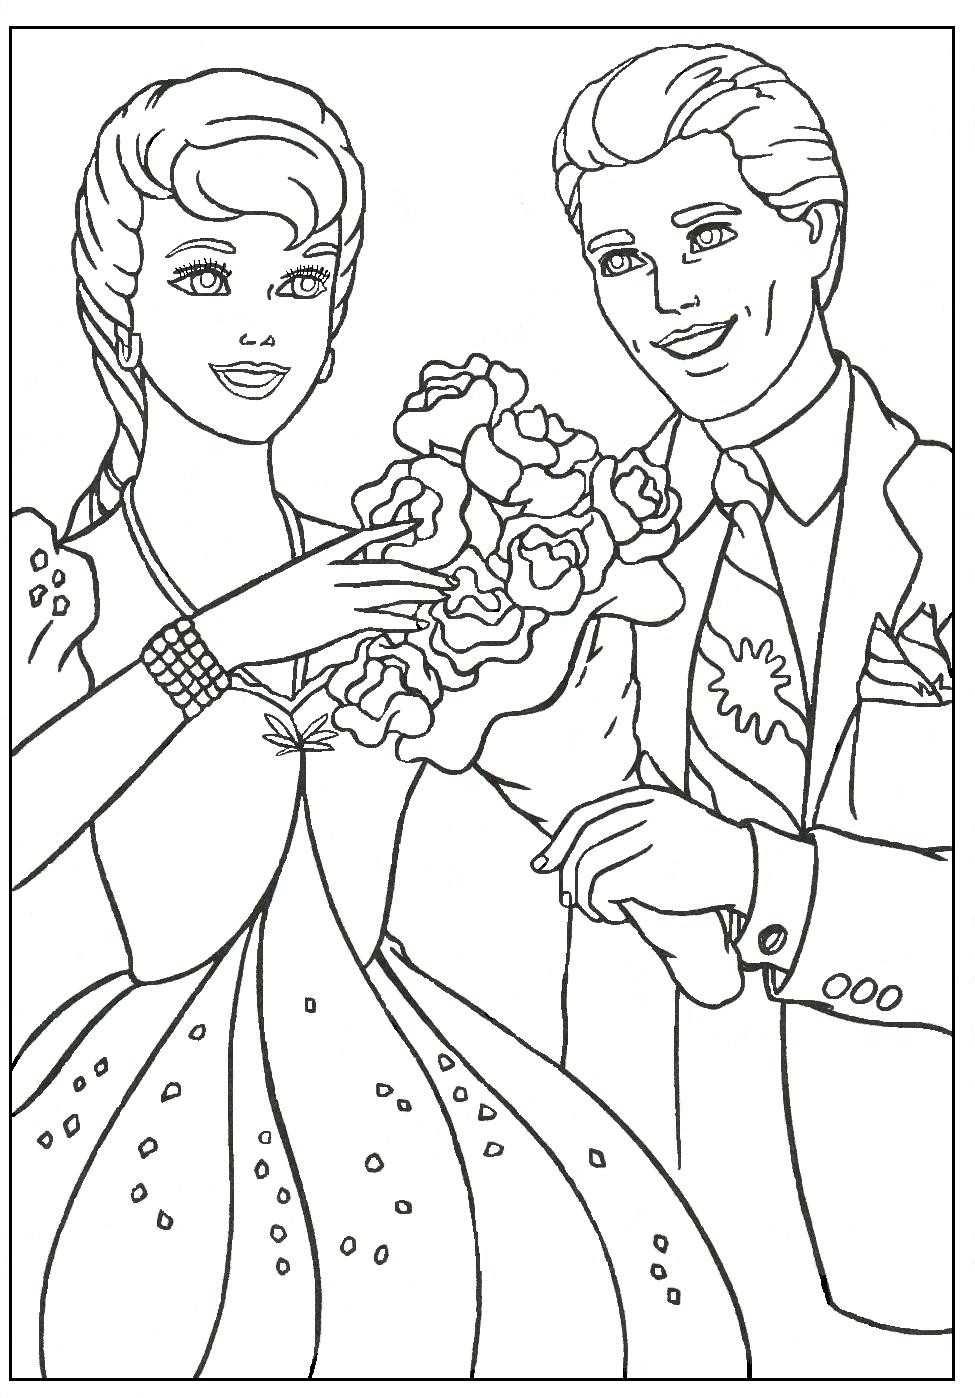 BARBIE COLORING PAGES: KEN AND BARBIE - MATTEL'S PERFECT COUPLE COLORING